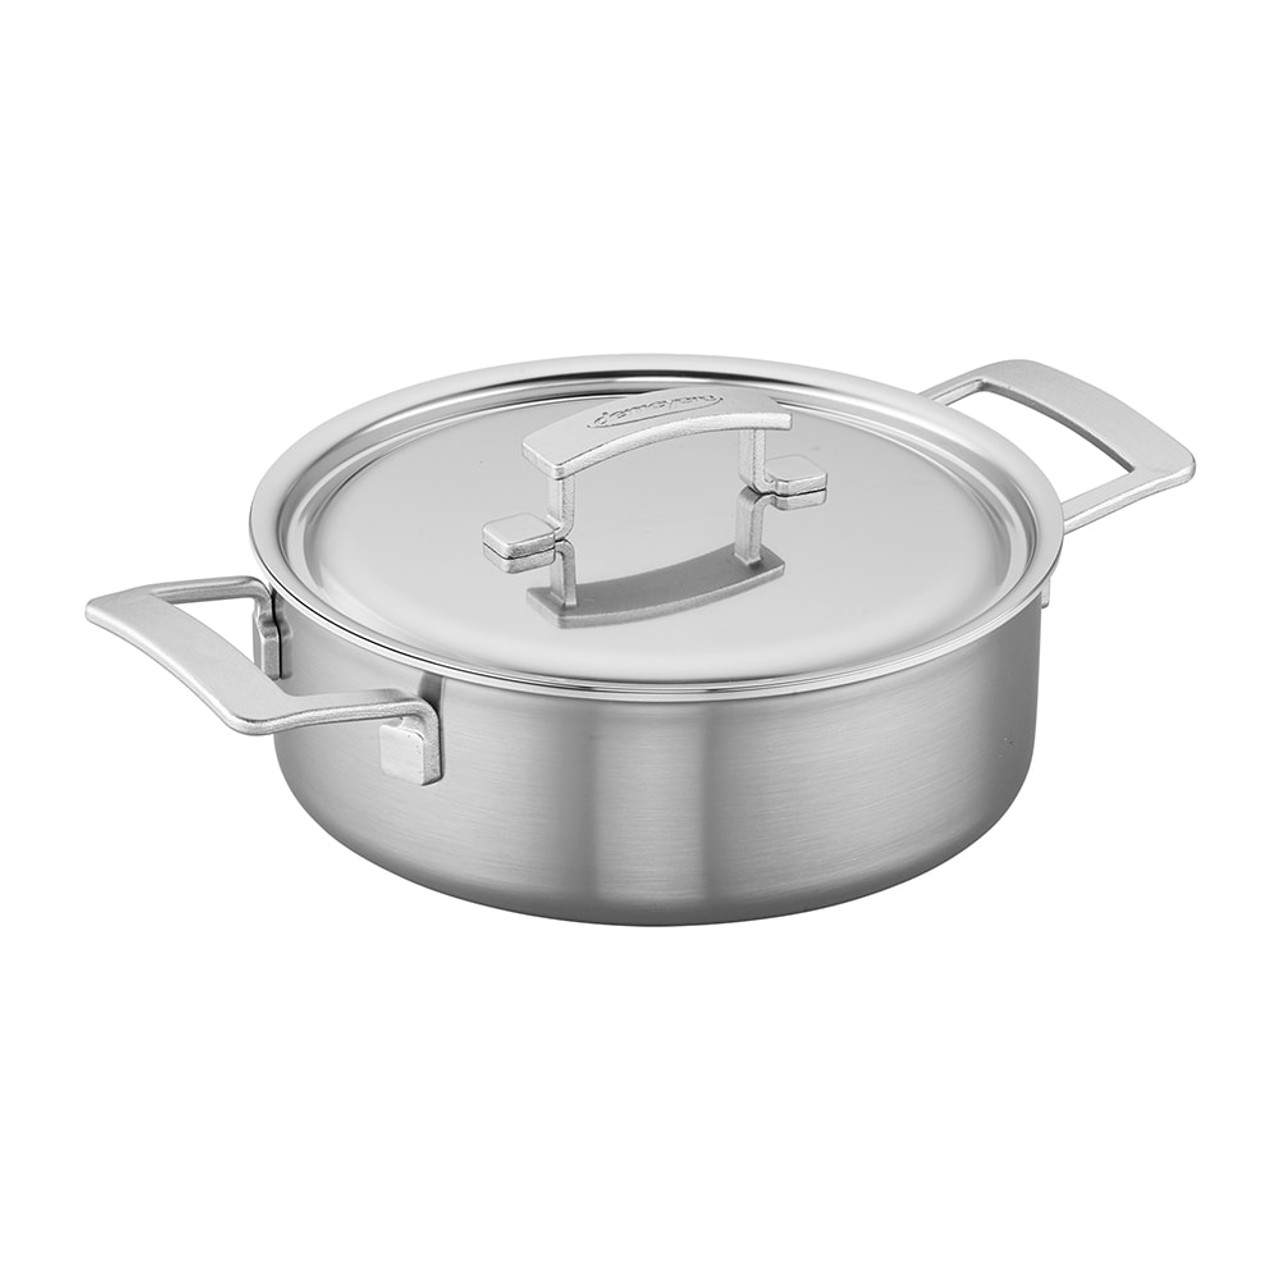 https://cdn11.bigcommerce.com/s-hccytny0od/images/stencil/1280x1280/products/2296/7704/demeyere-industry-5-stainless-steel-deep-saute-pan__17057.1549679077.jpg?c=2?imbypass=on